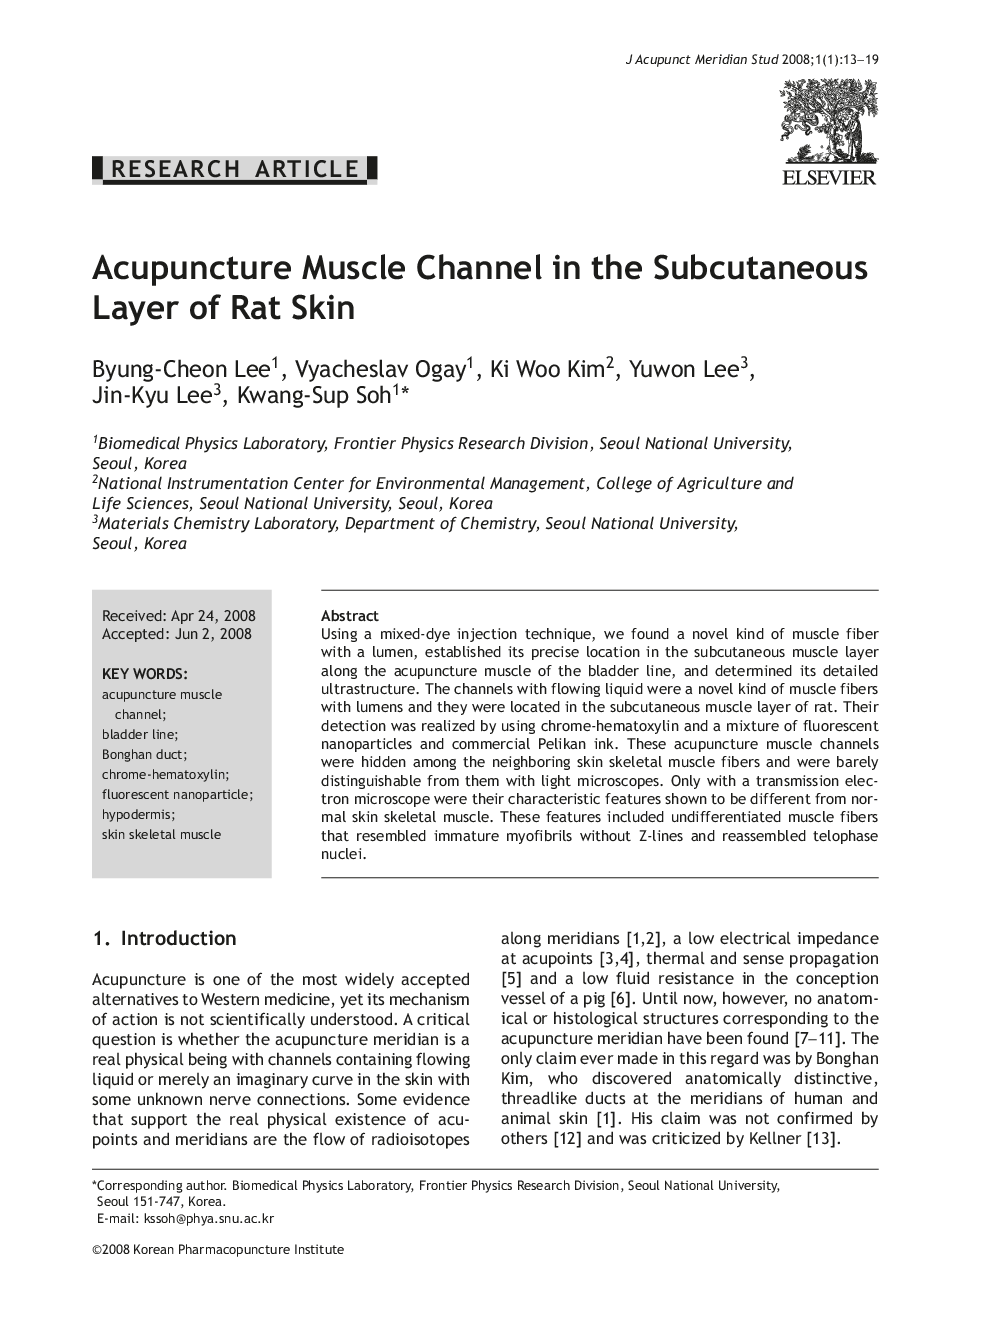 Acupuncture Muscle Channel in the Subcutaneous Layer of Rat Skin